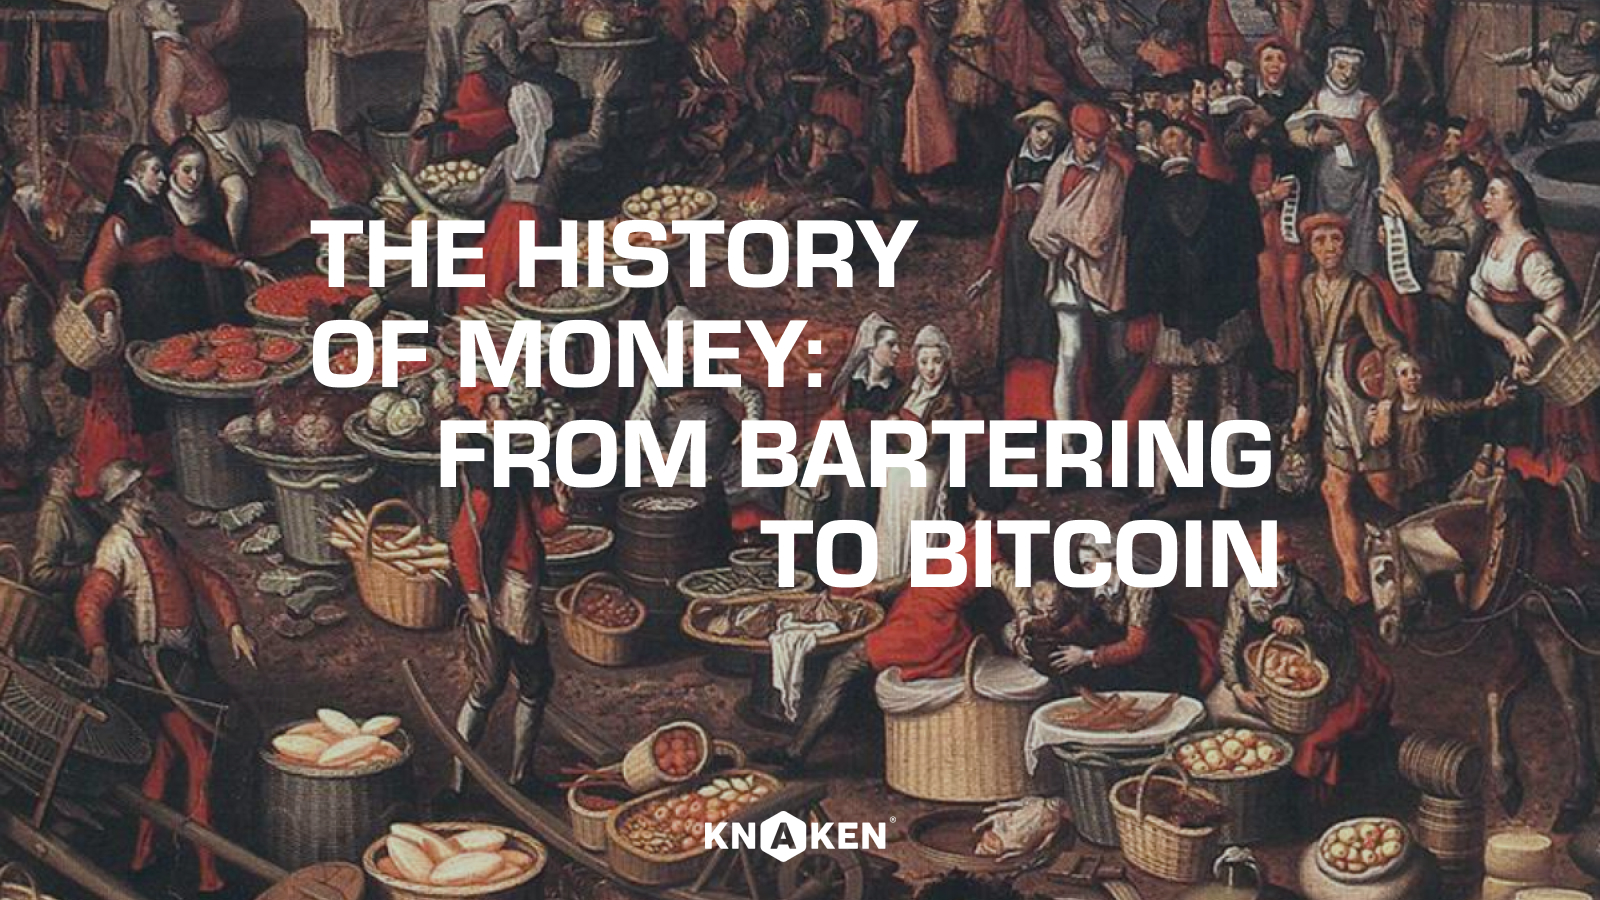 The history of money: from bartering to bitcoin